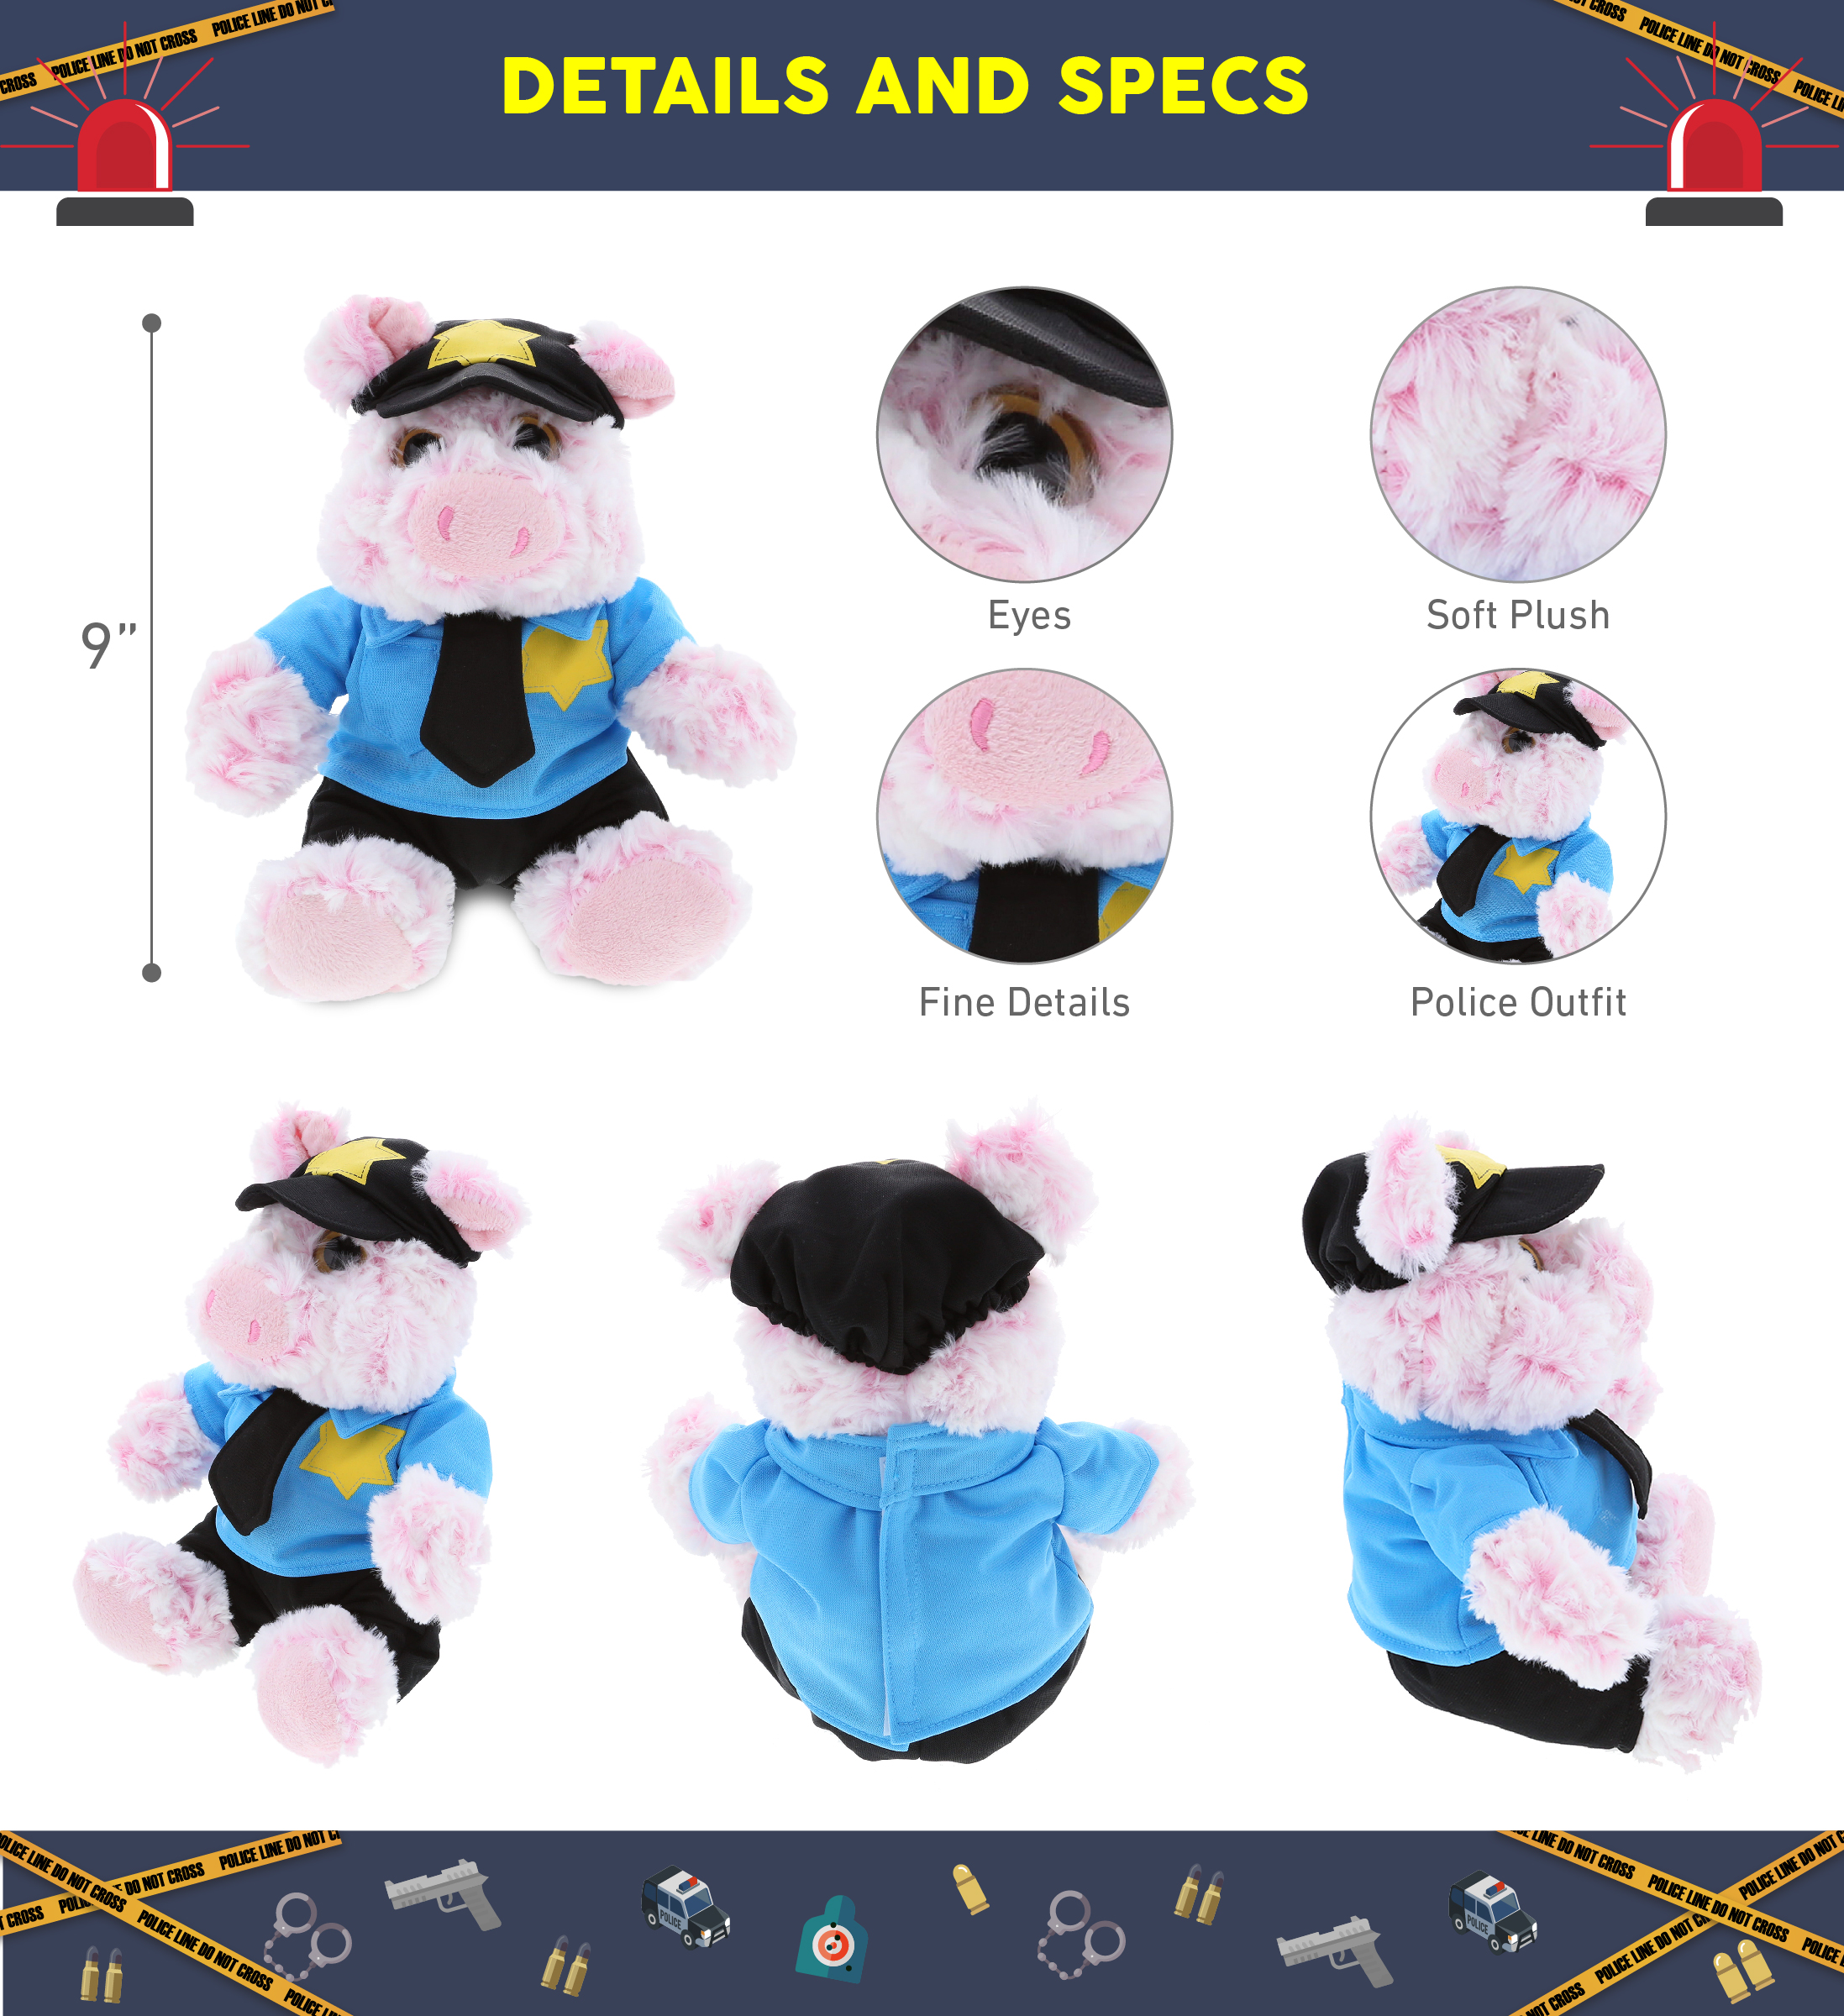 Dollibu Police Officer Dress Up Set for Teddy Bear Plush Toy - Police Outfit for Stuffed Animals, Cute Set of Police Hat, Shirt, & Pants for Teddy